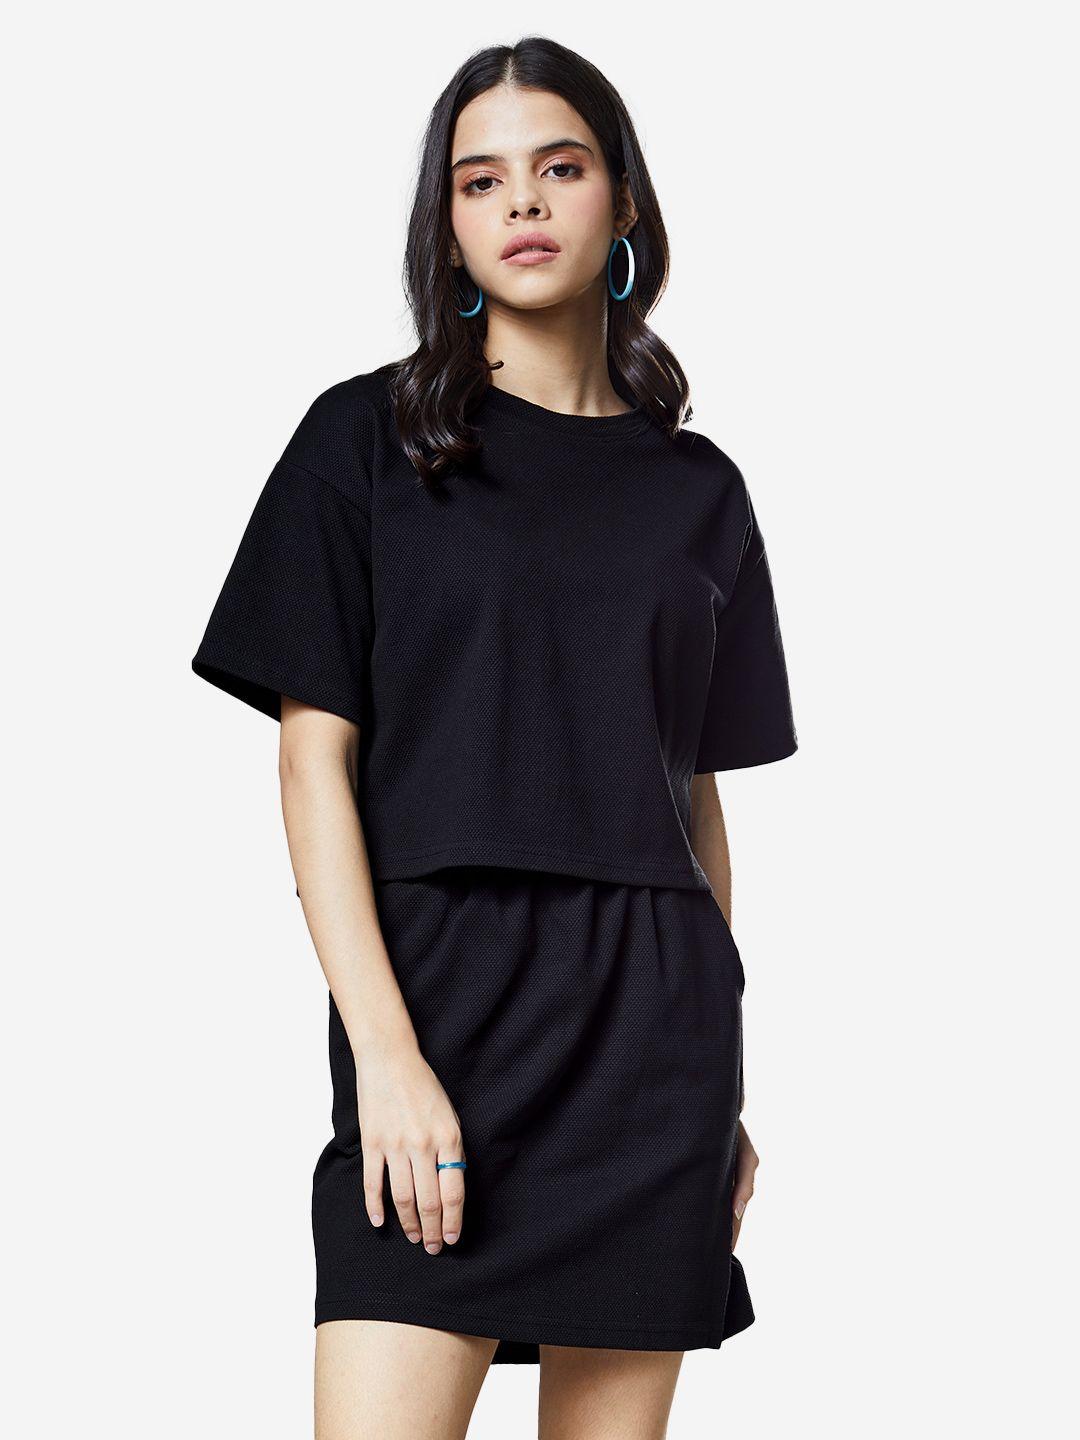 the souled store women black solid co-ords